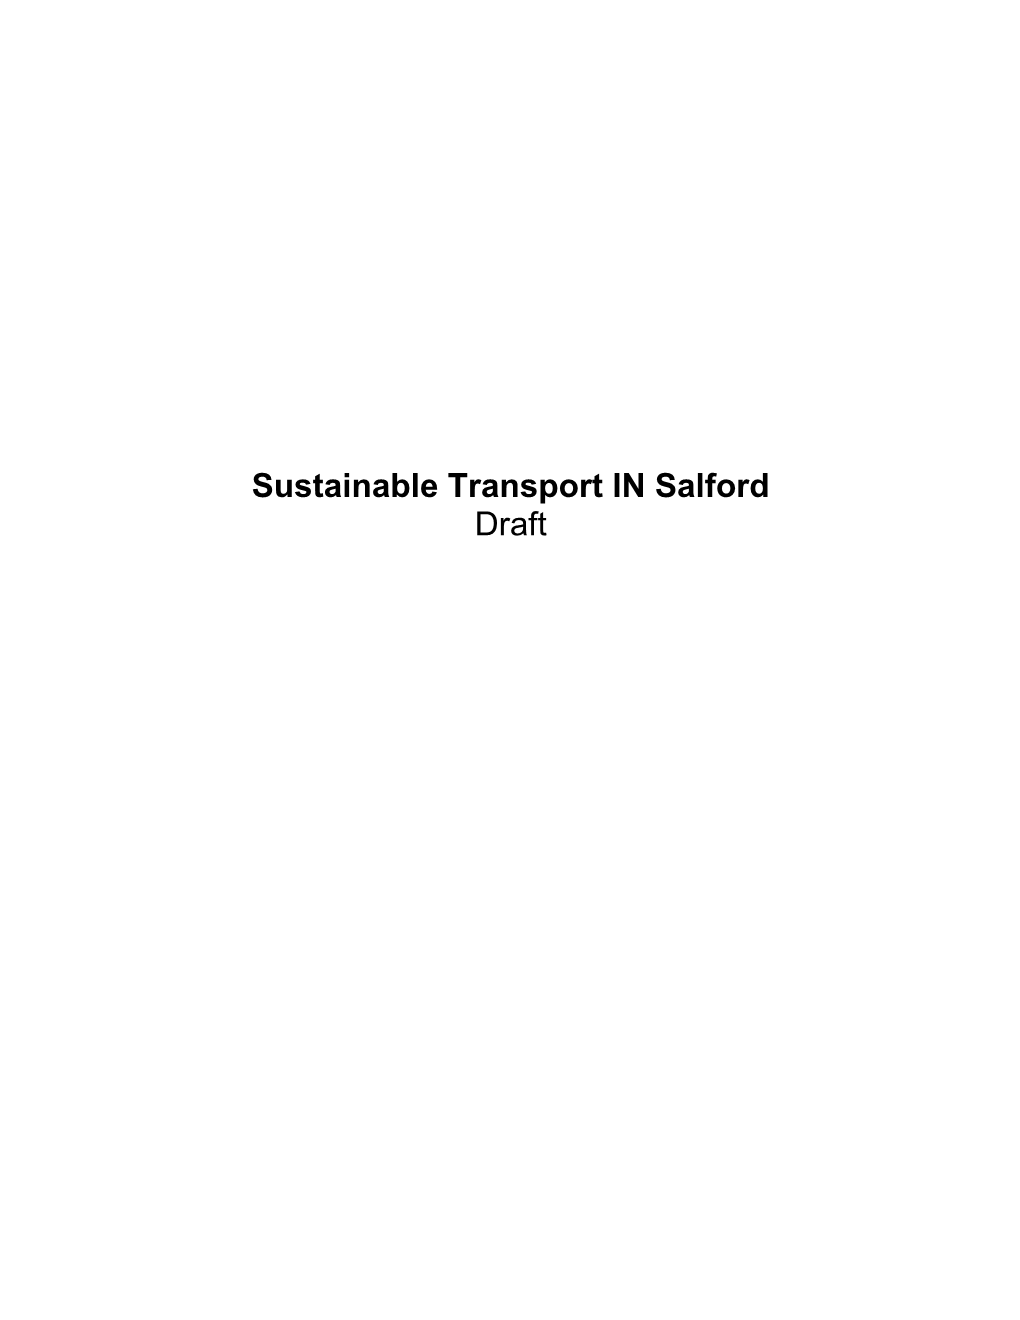 Sustainable Transport in Salford